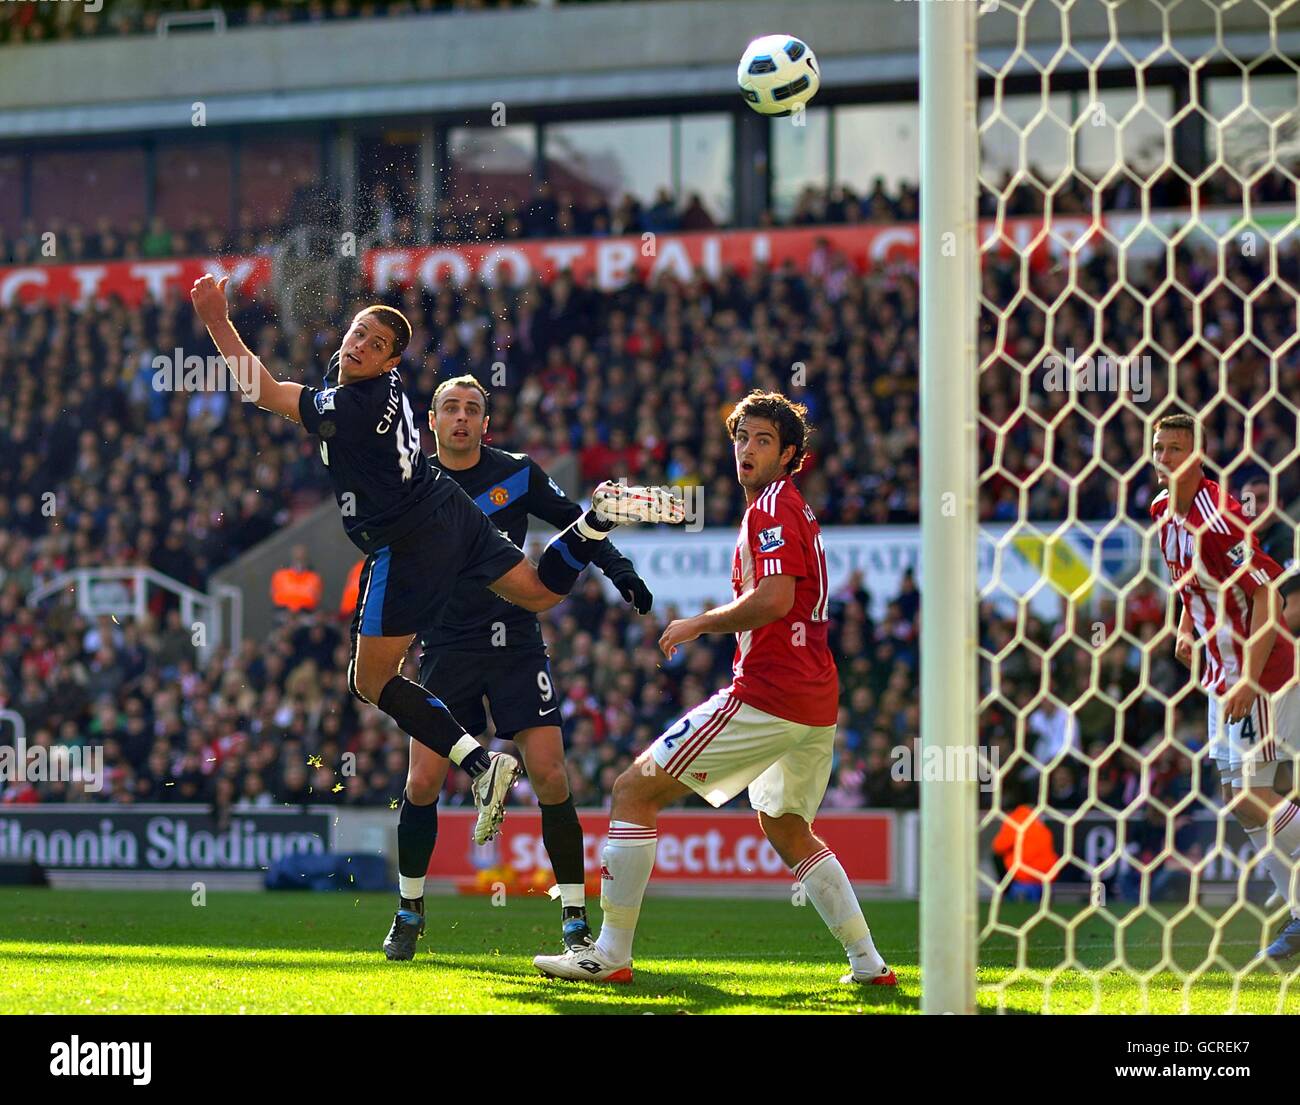 Soccer - Barclays Premier League - Stoke City v Manchester United - Britannia Stadium. Manchester United's Javier Hernandez scores the opening goal of the game Stock Photo